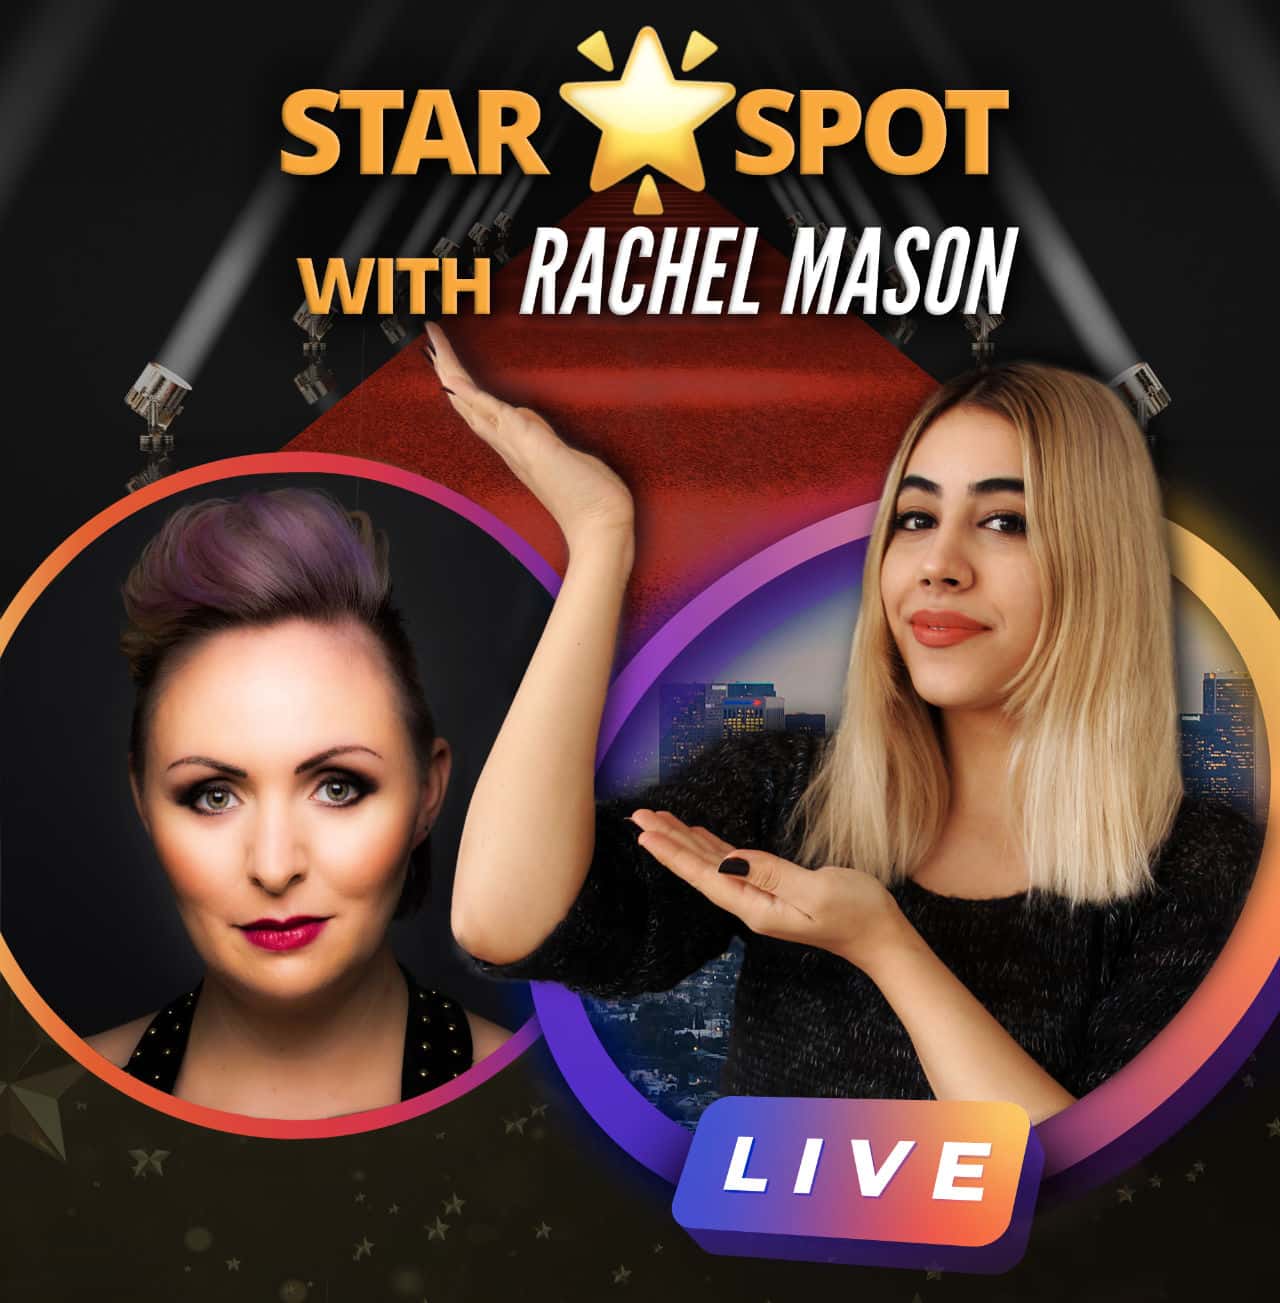 Promotional cover art of Star Spot with Rachel Mason